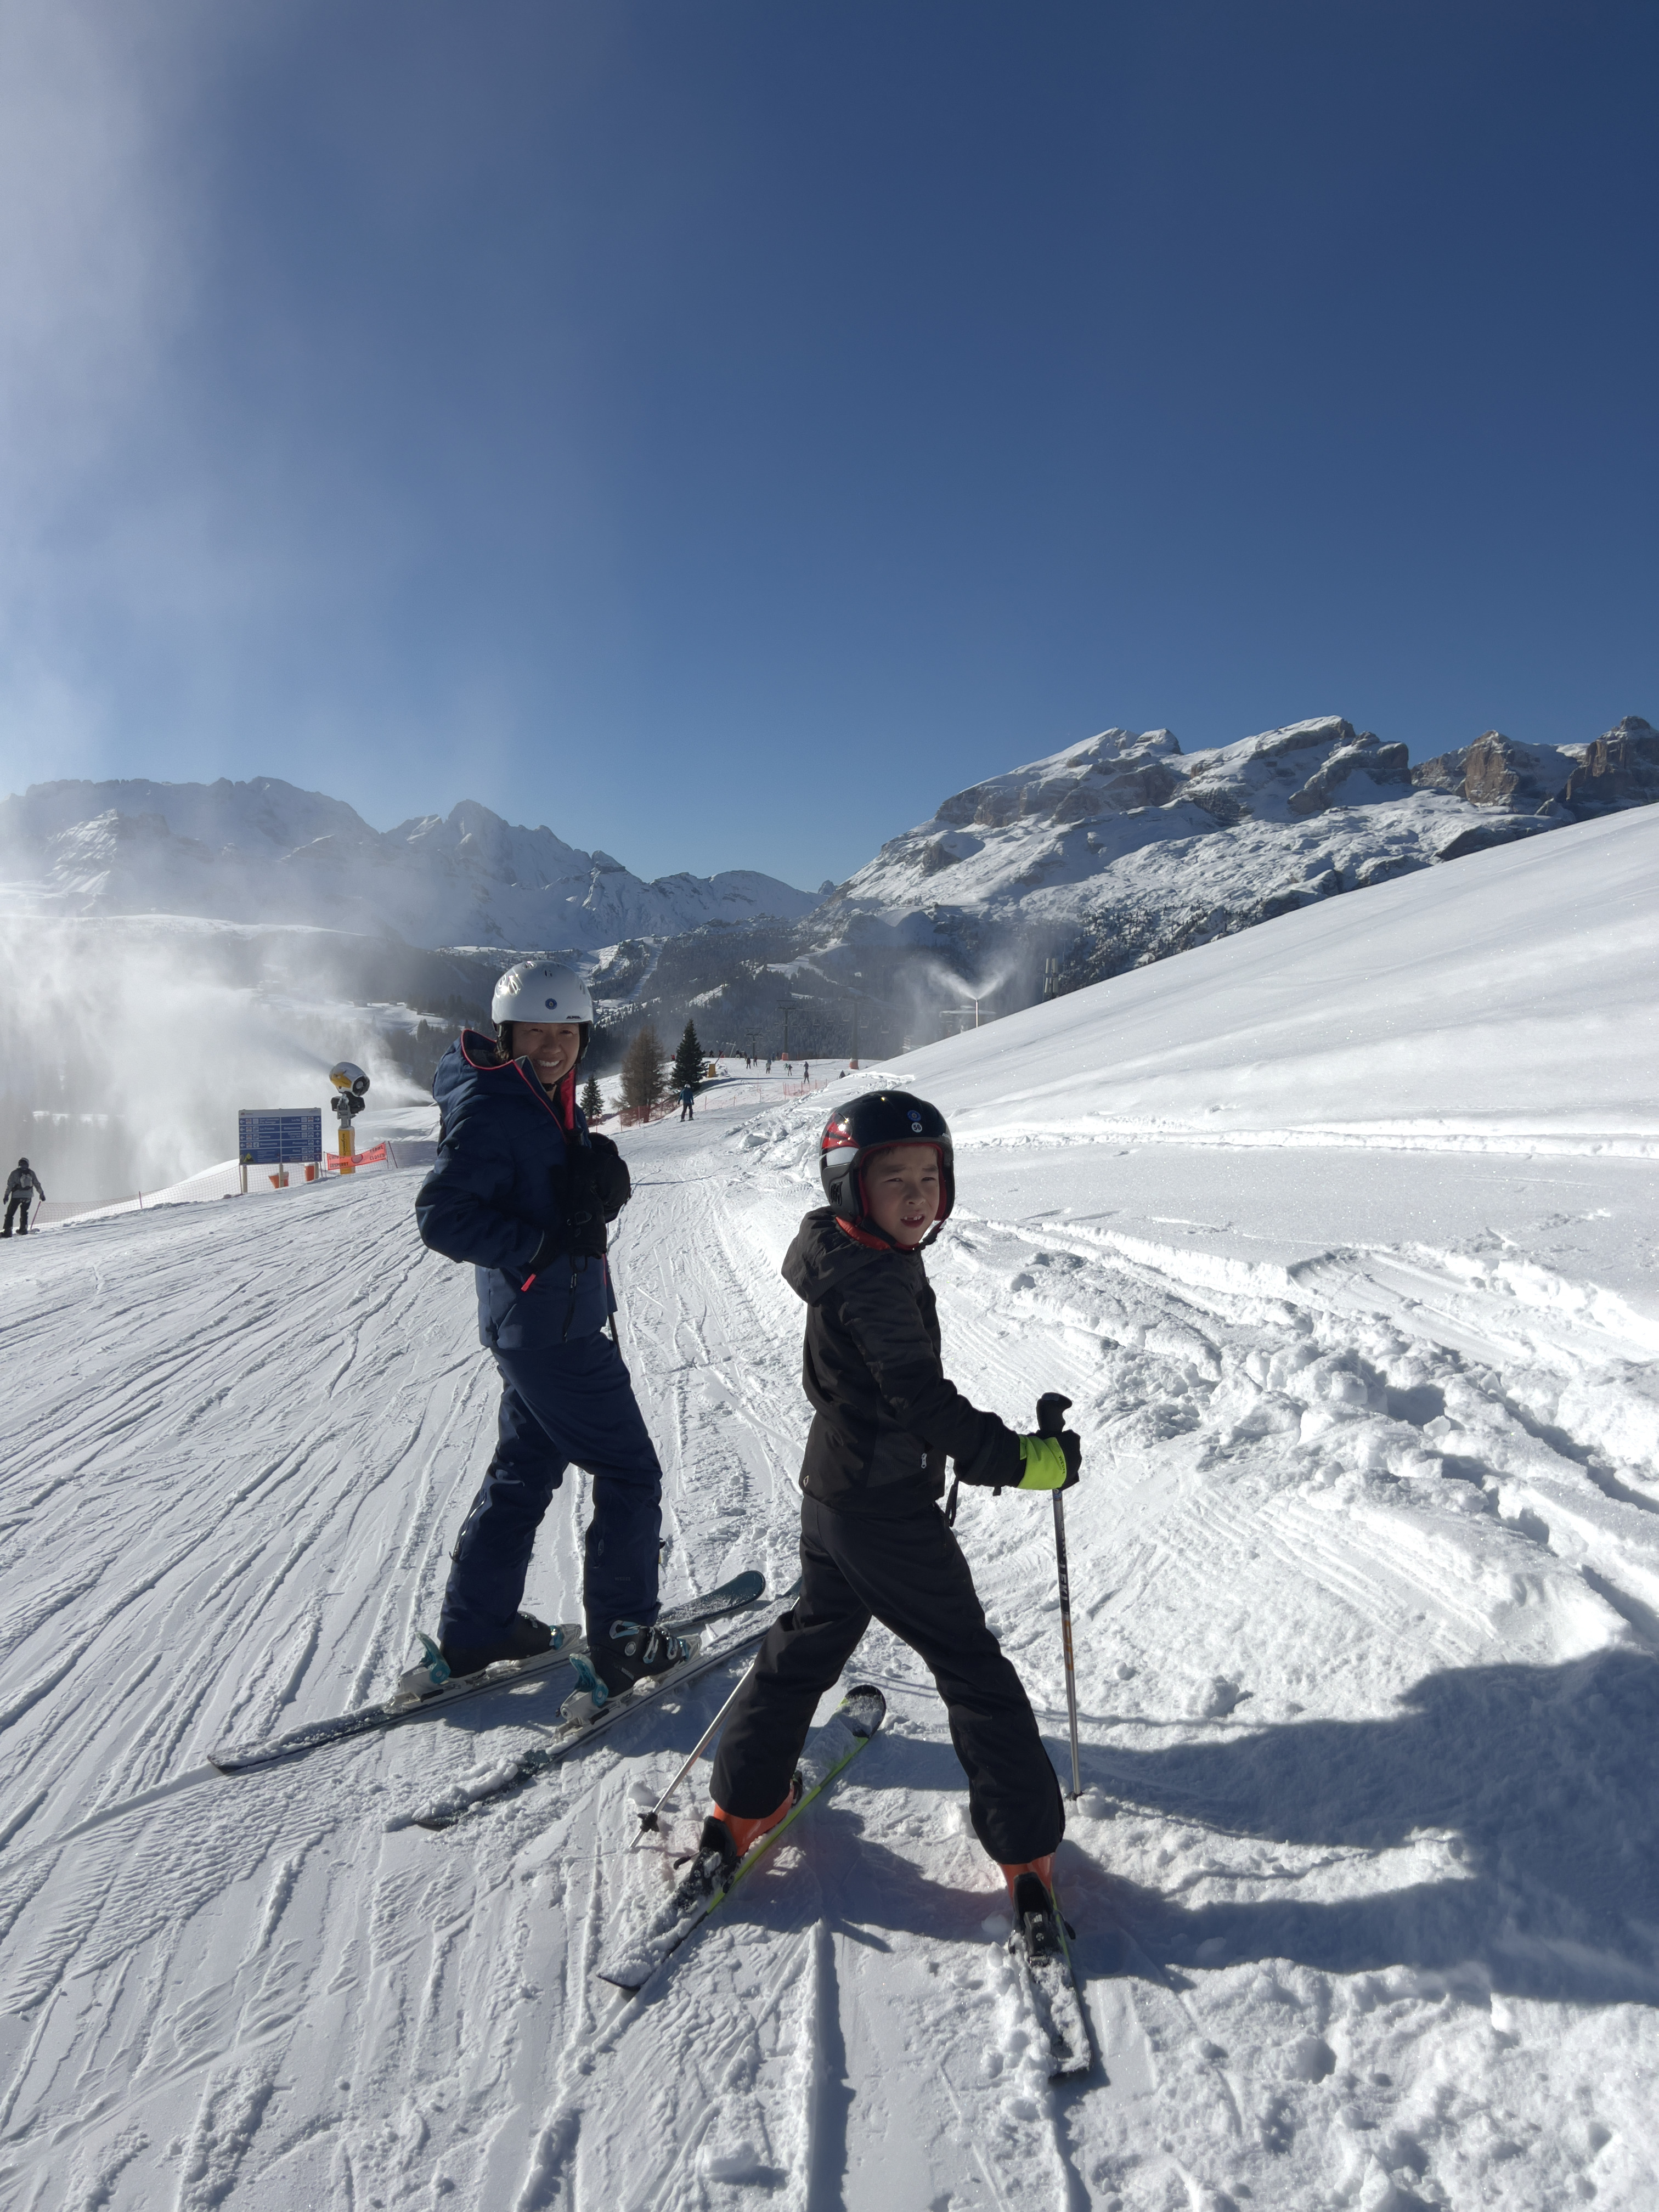 We took to the powdery slopes, 2,000m above sea-level